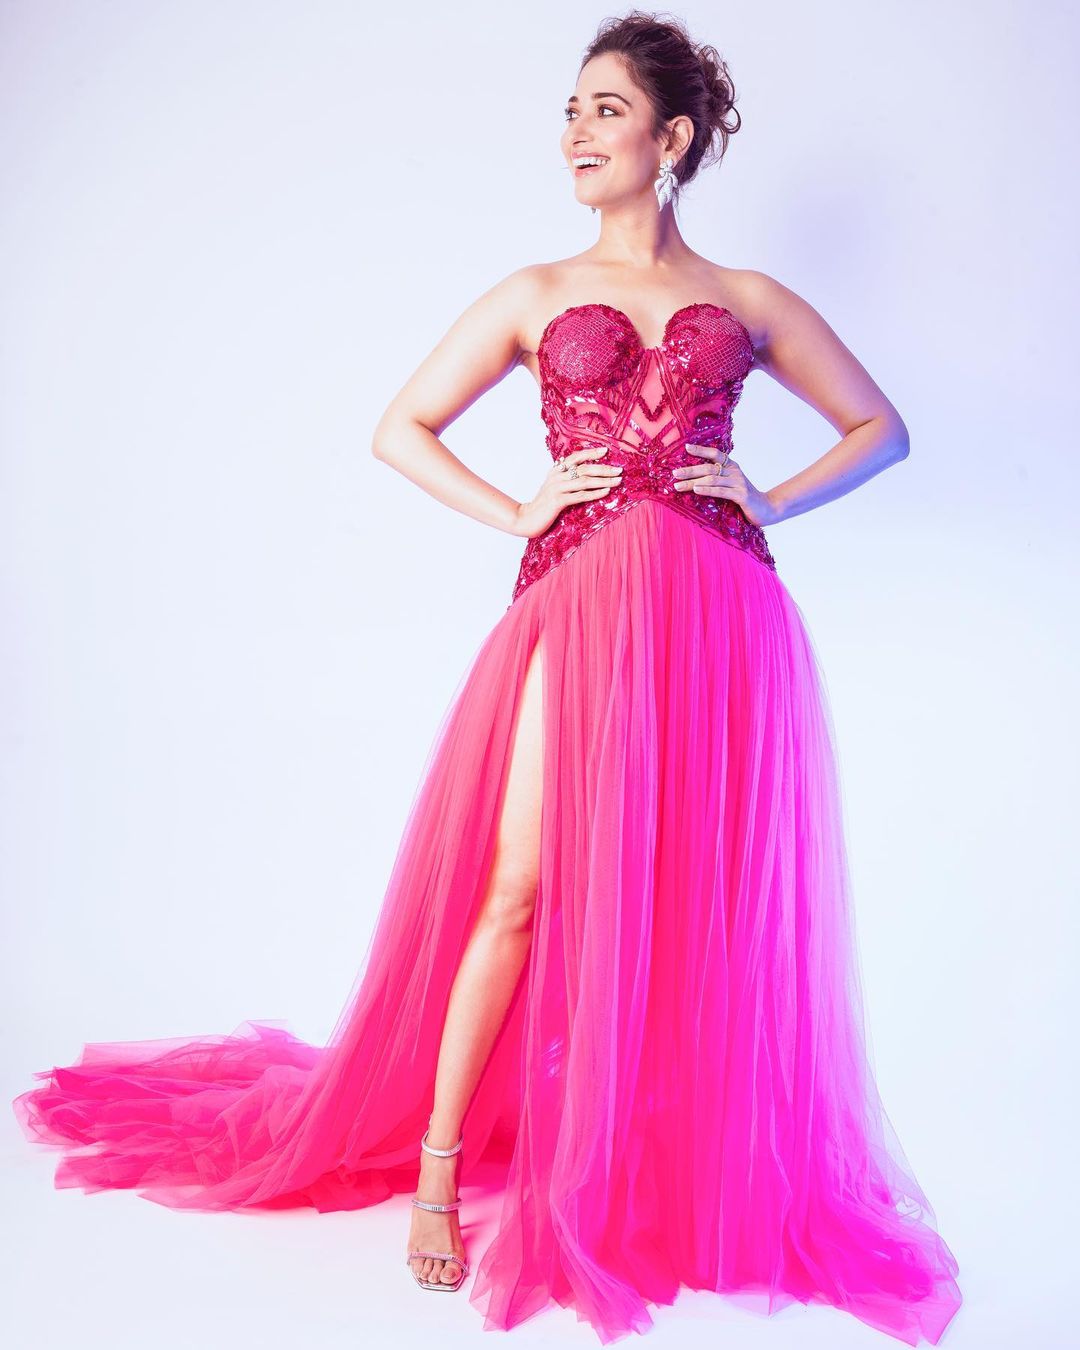 Tamannaah Bhatia looks like a high-end doll in the hot pink dress. 